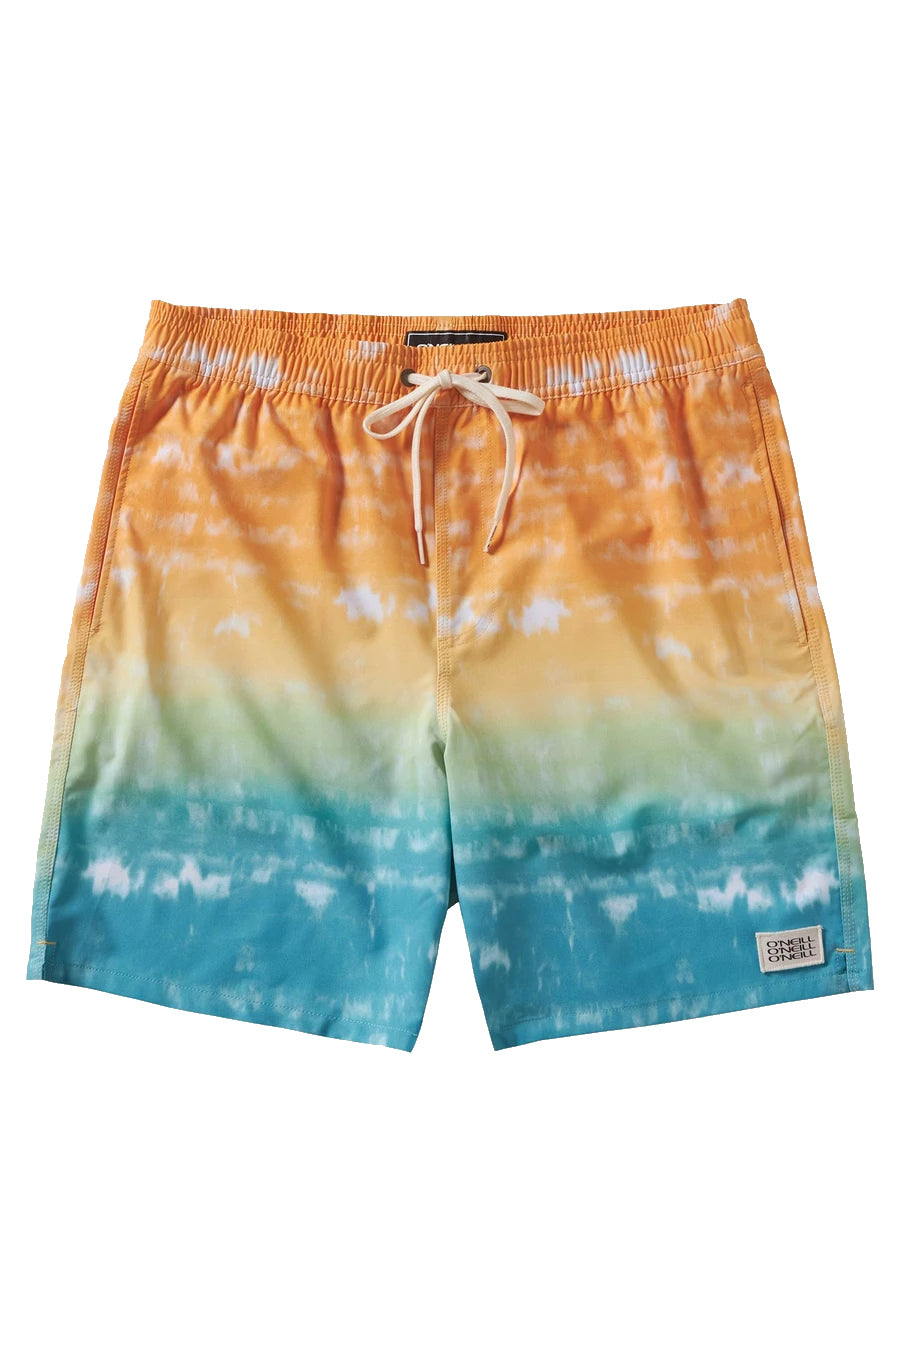 O'neill Mixed Up 17" Volley Boardshorts MUL-Multi M